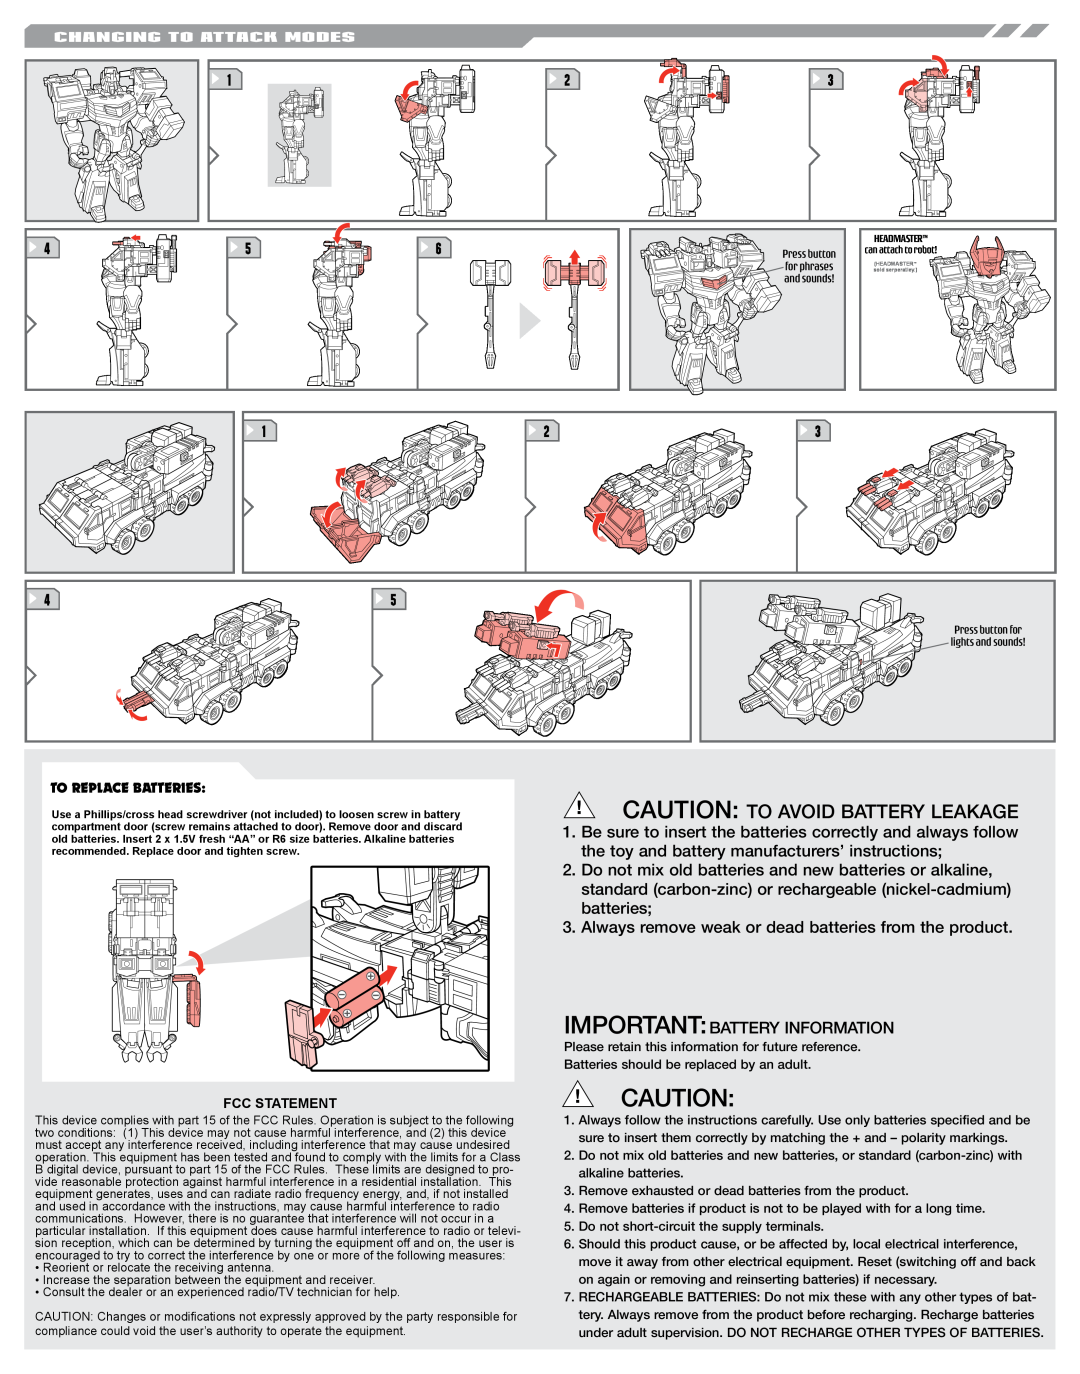 Hasbro 83501 manual Changing To Attack Modes, Caution To Avoid Battery Leakage, Importantbattery Information, Fcc Statement 